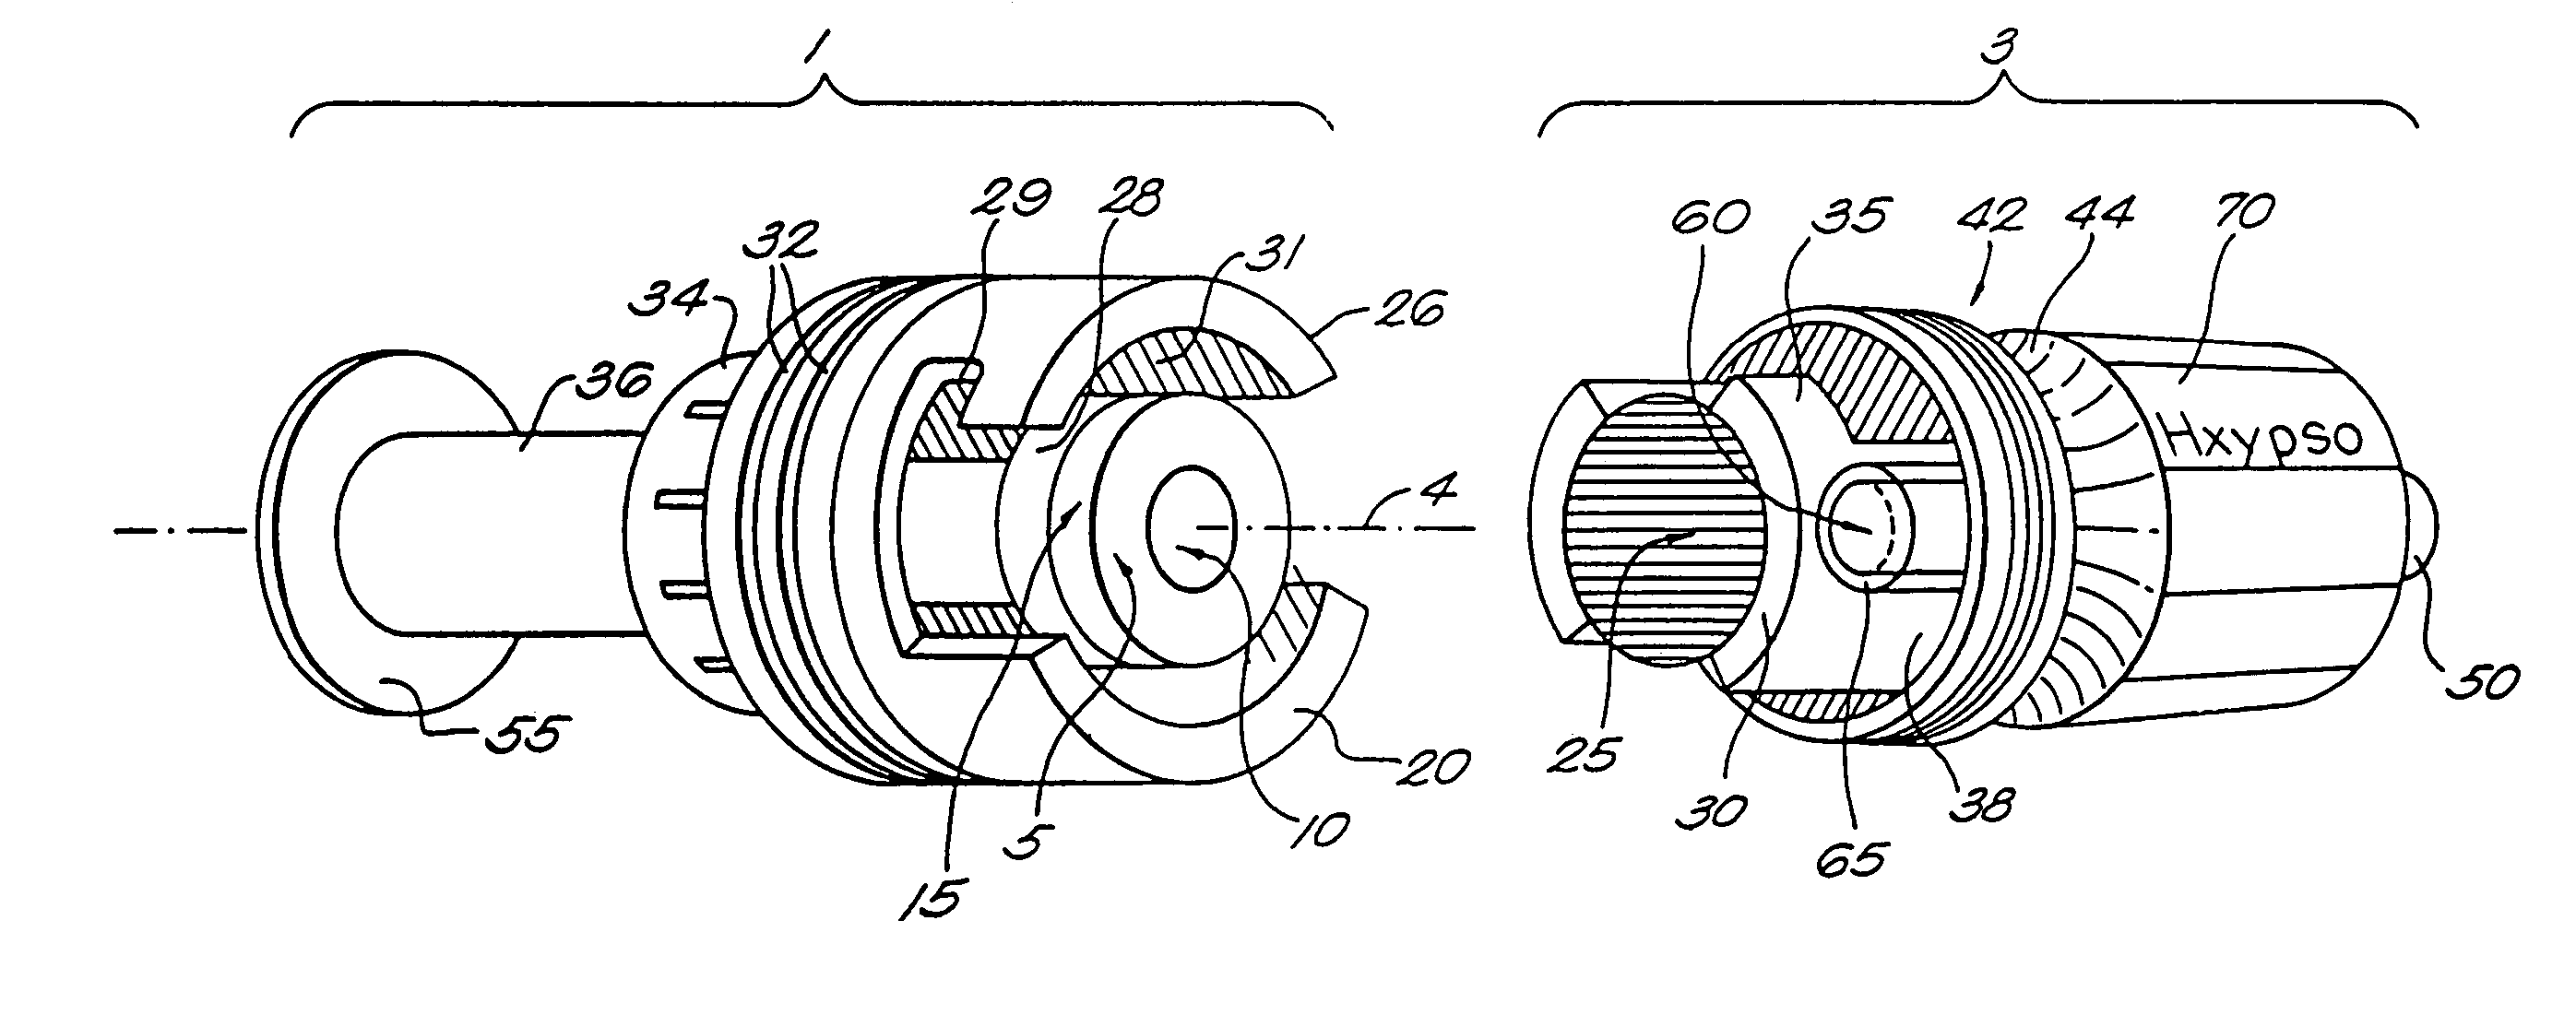 Fastening mechanism for medical connectors